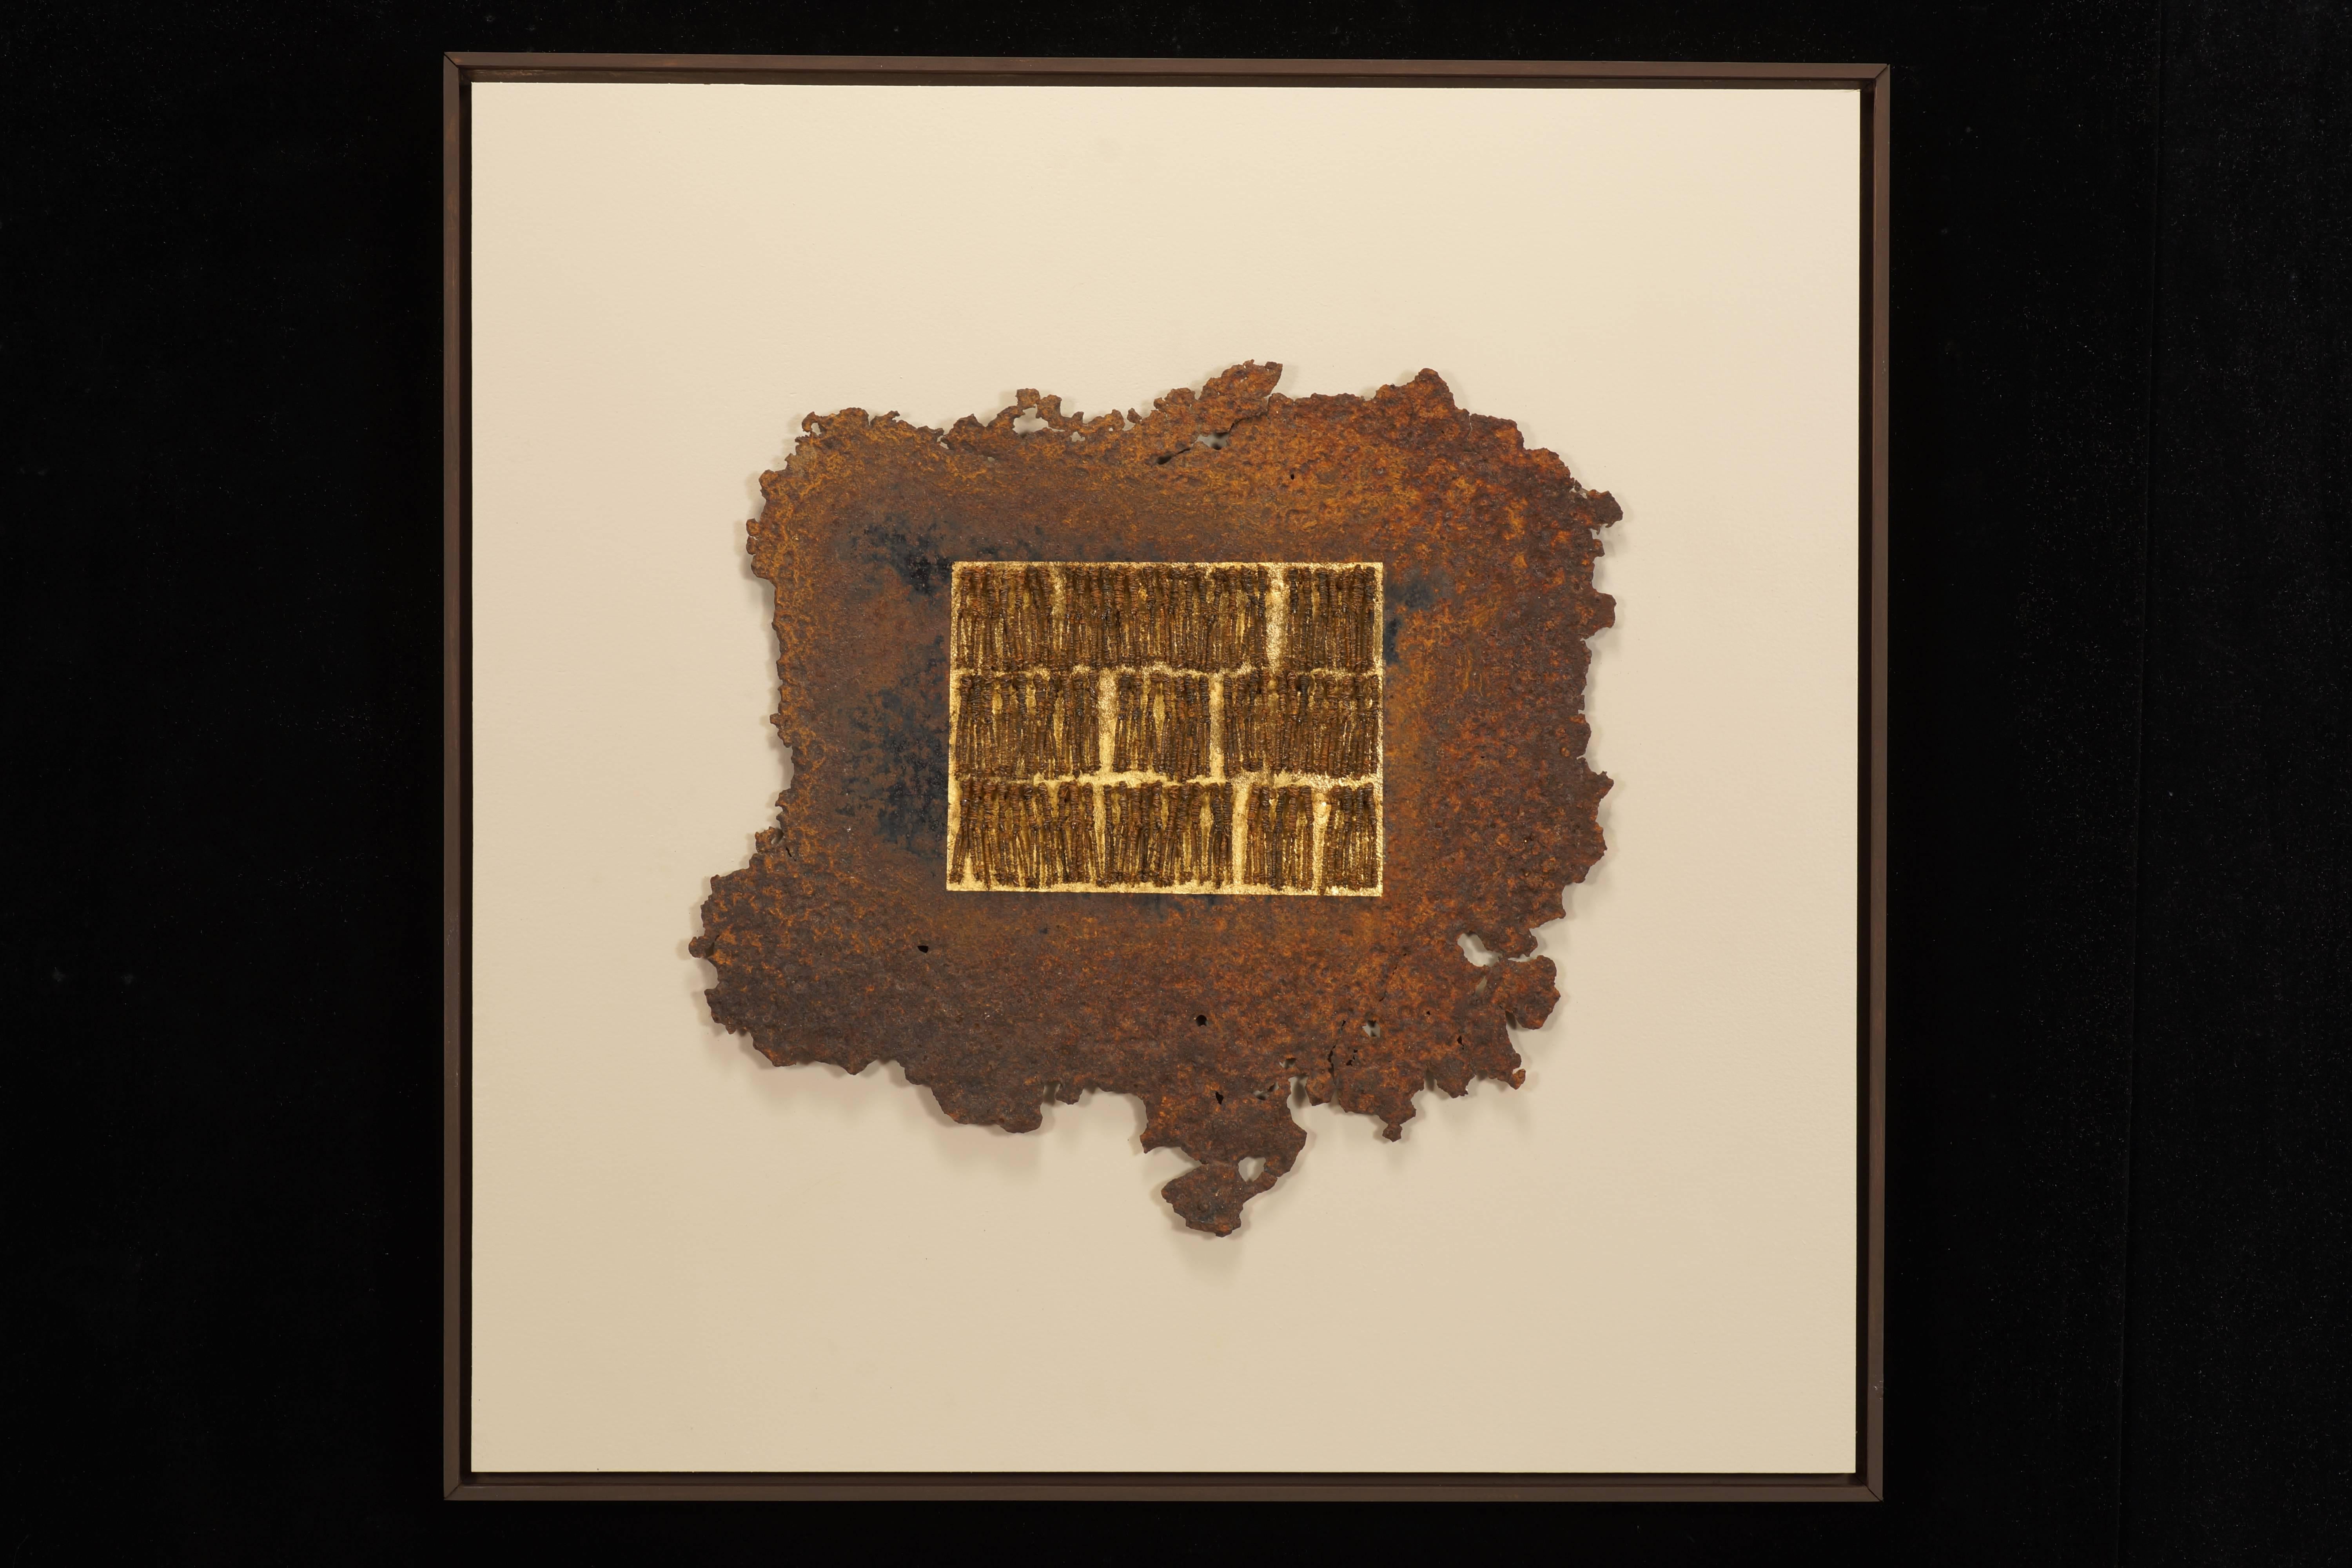 Mary Giles utilizes textile processes and fiber techniques to create refined contemporary sculptural forms that reference nature and geography. 

Golden Tablet is constructed from found metal, rusted iron wire, gold leaf, all mounted on a wood